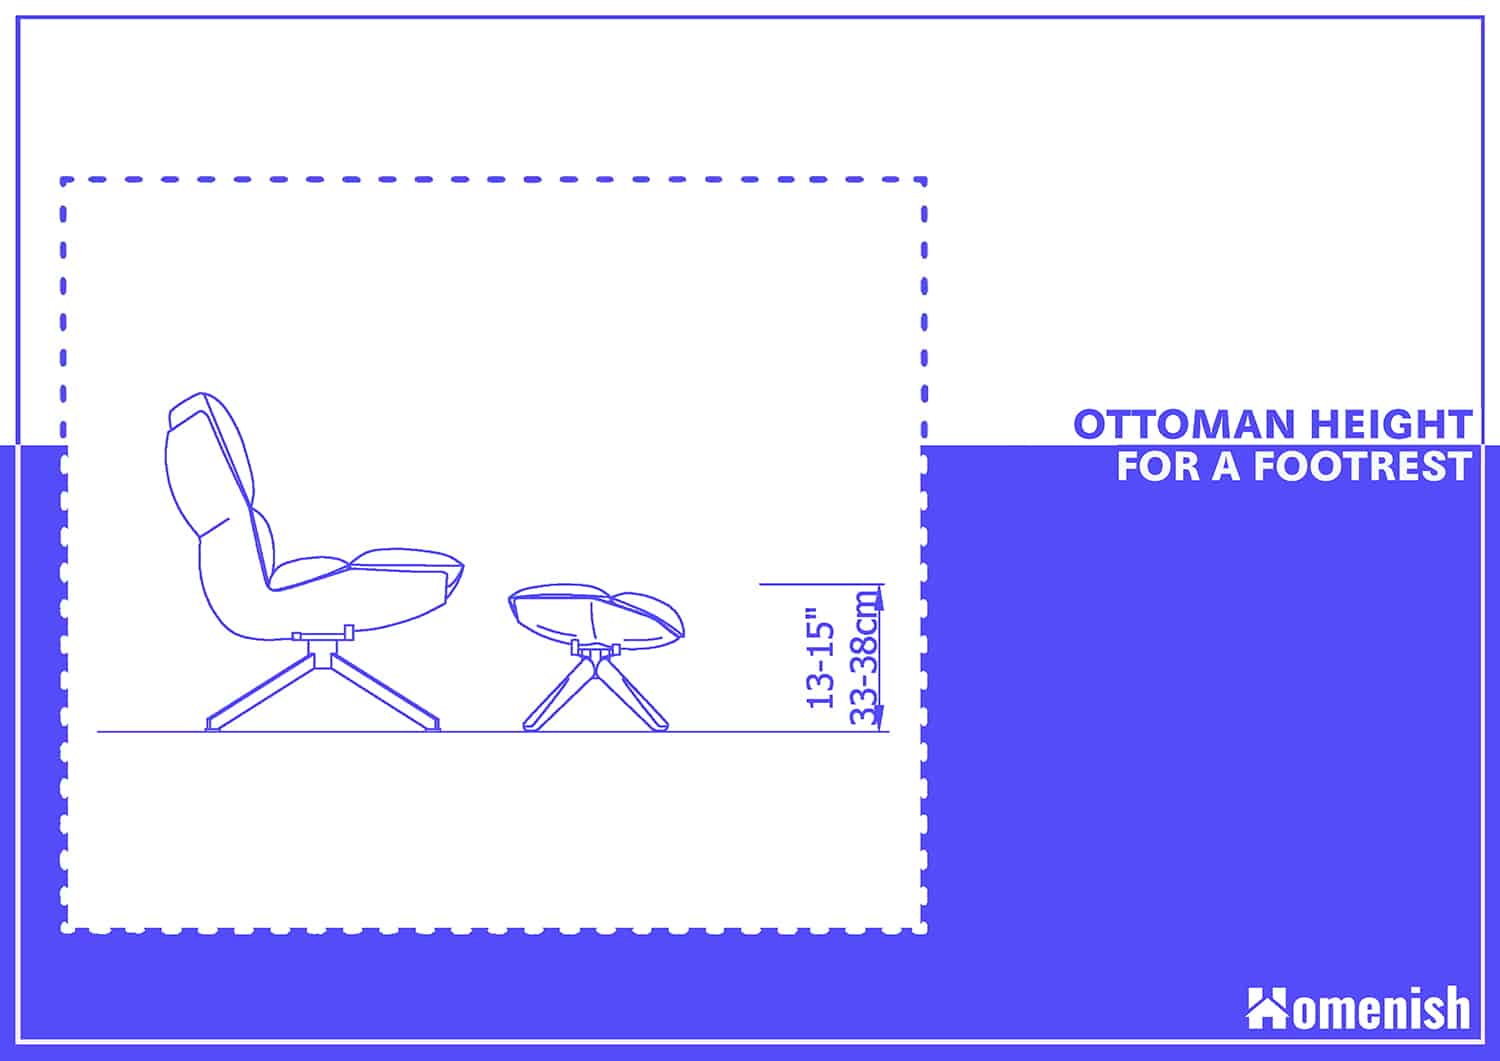 Ottoman Height for a Footrest